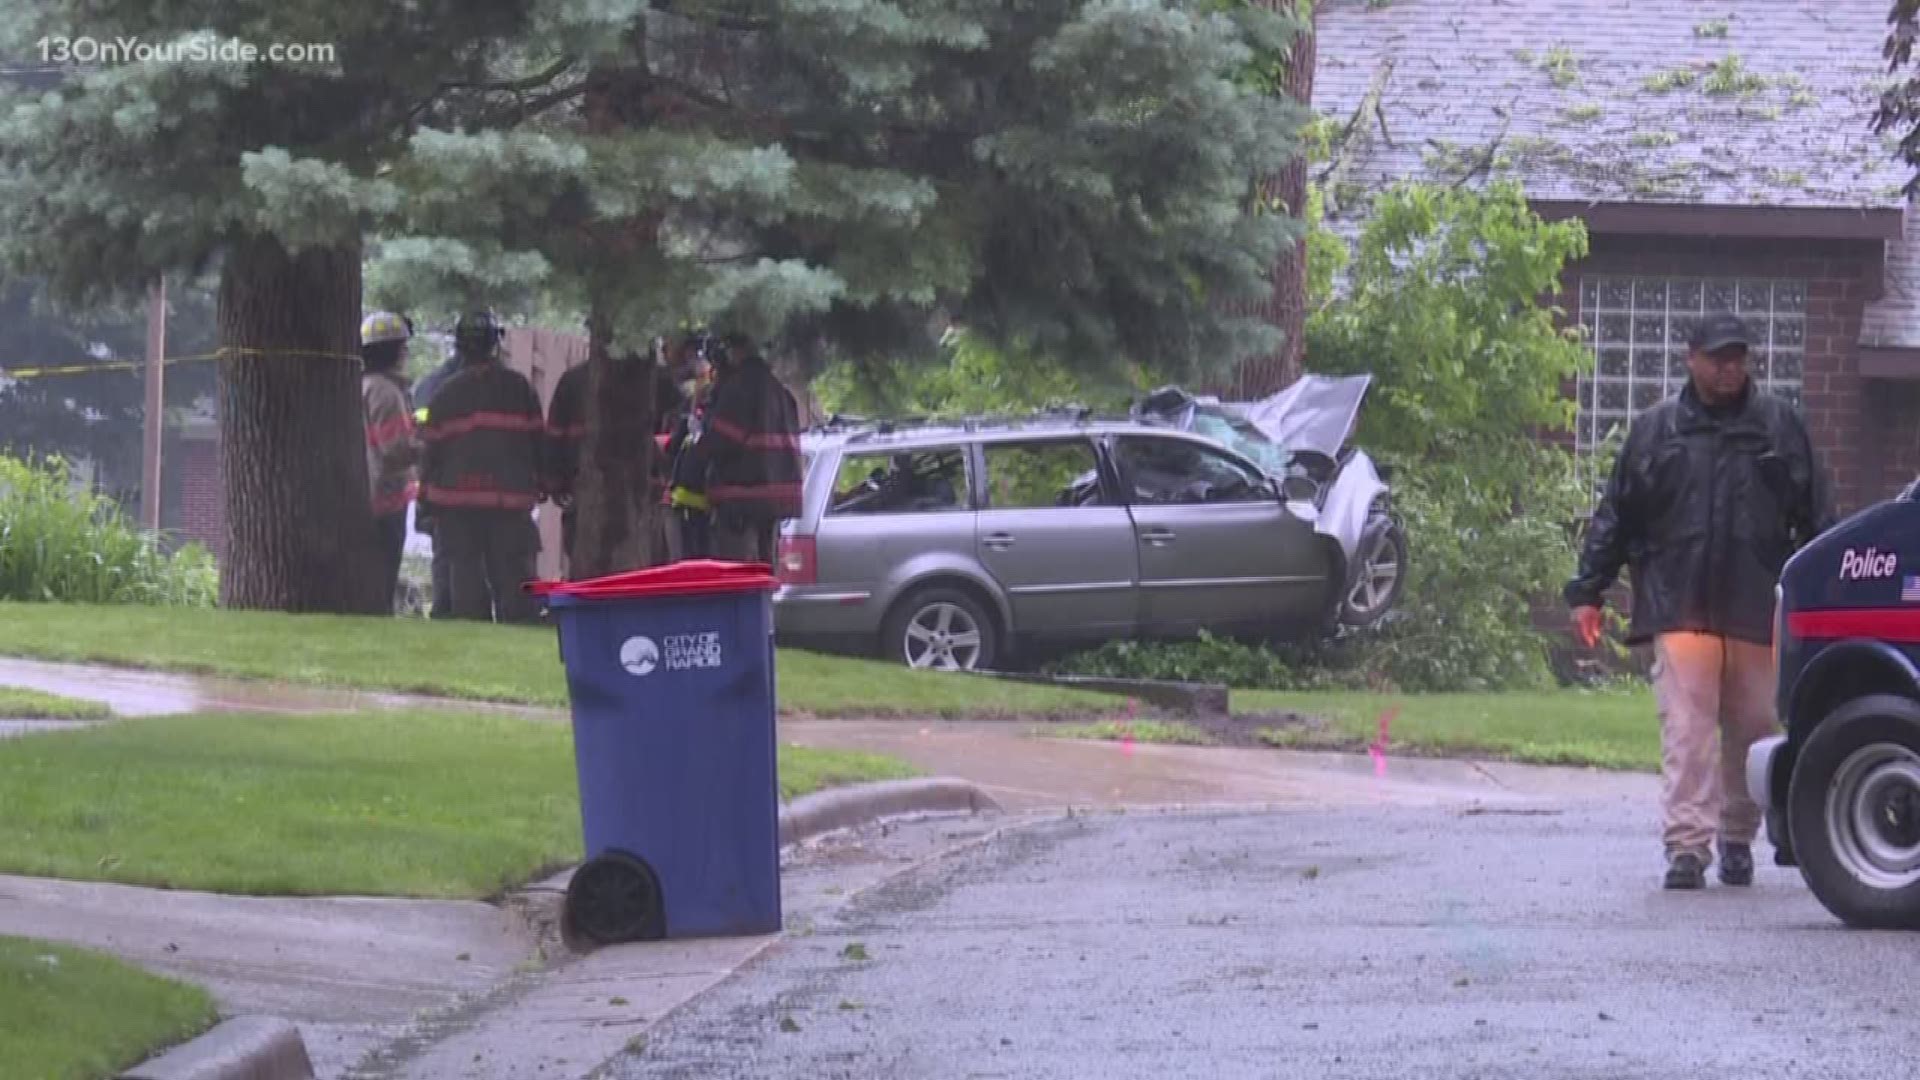 Grand Rapids Police say a 43-year-old man has died after hitting a tree at a home near Riverside Park. No witnesses have been located, thus far.